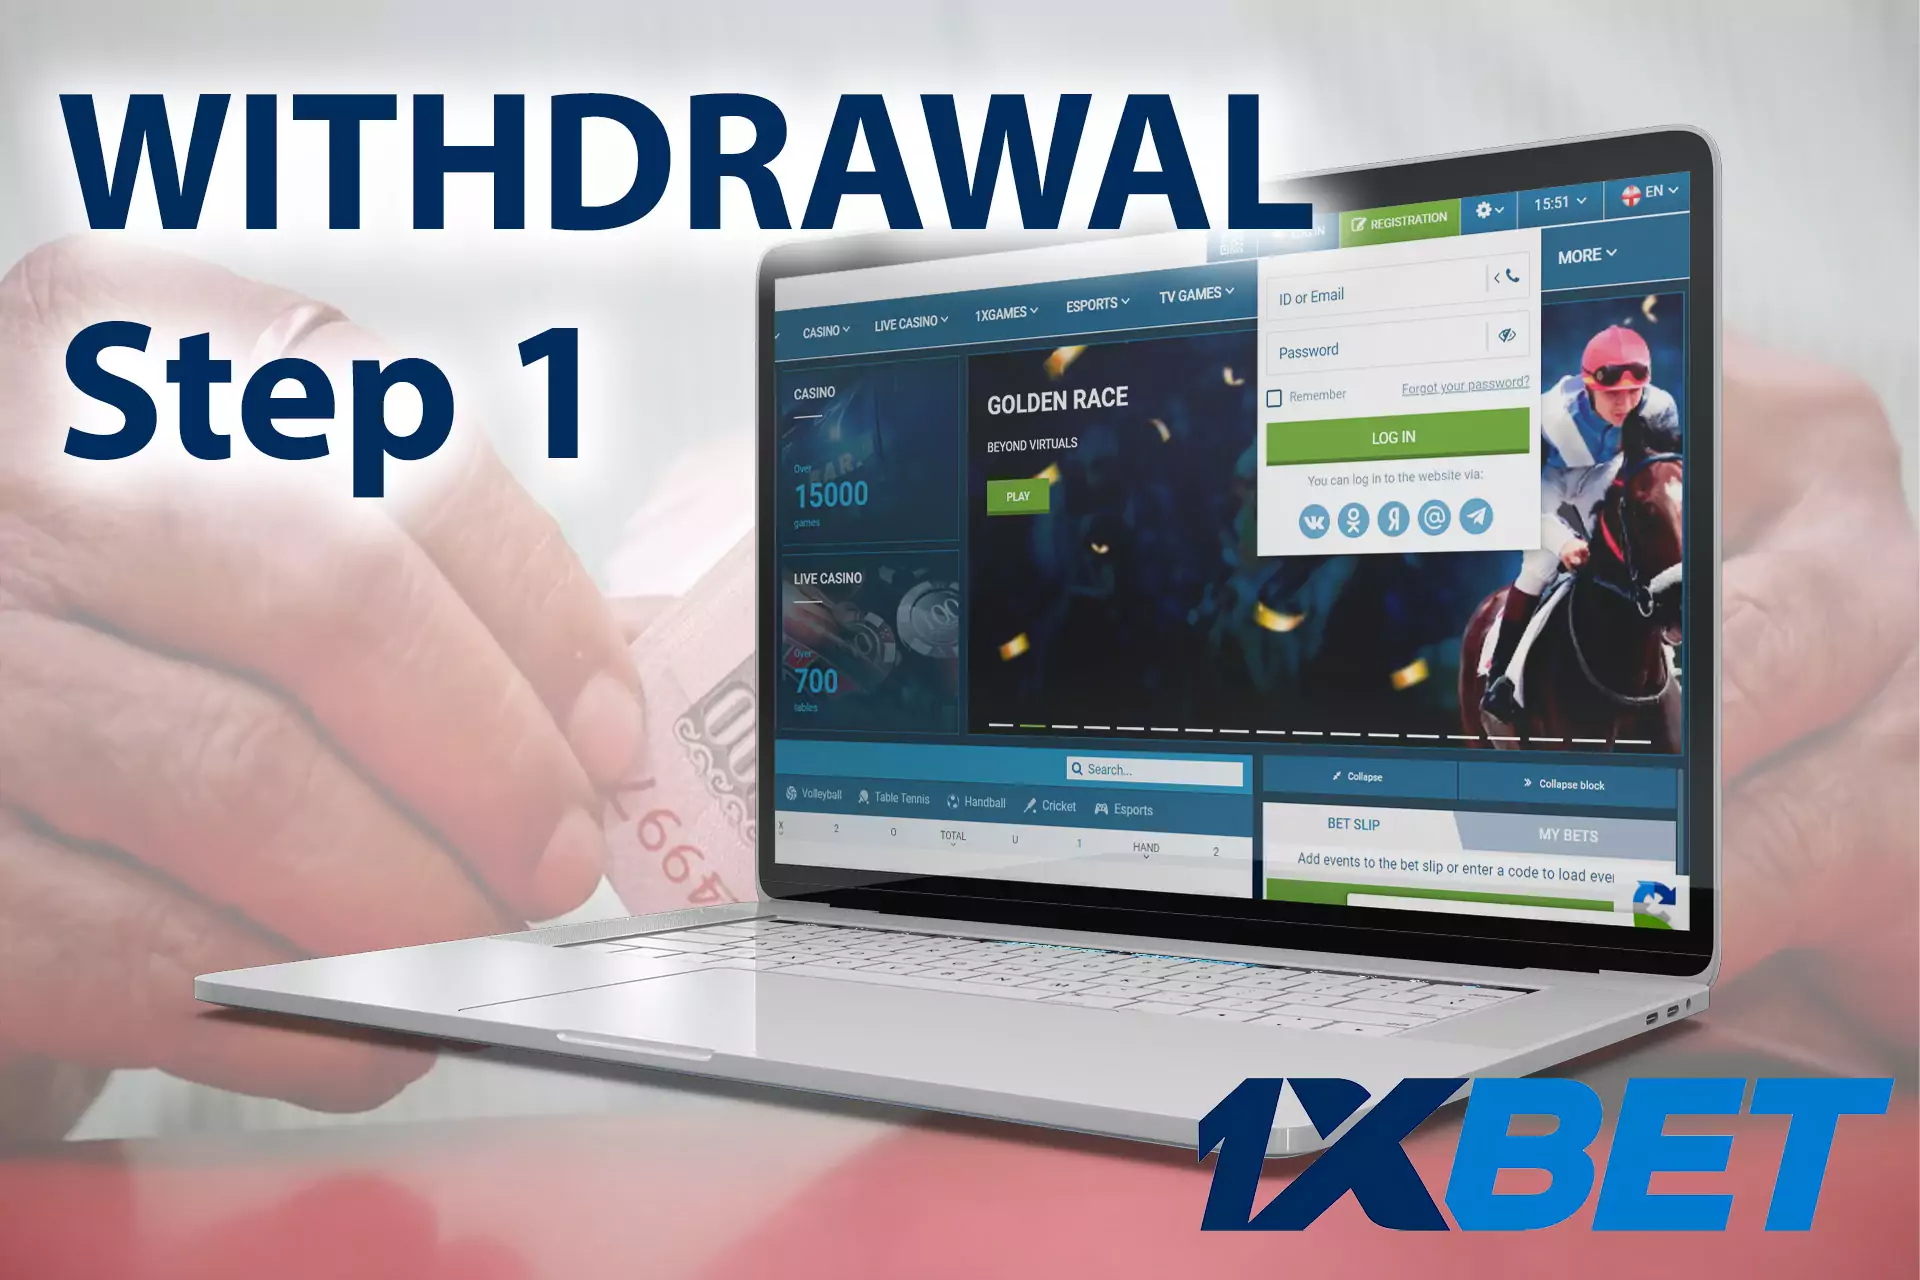 Enter to your 1xbet account.